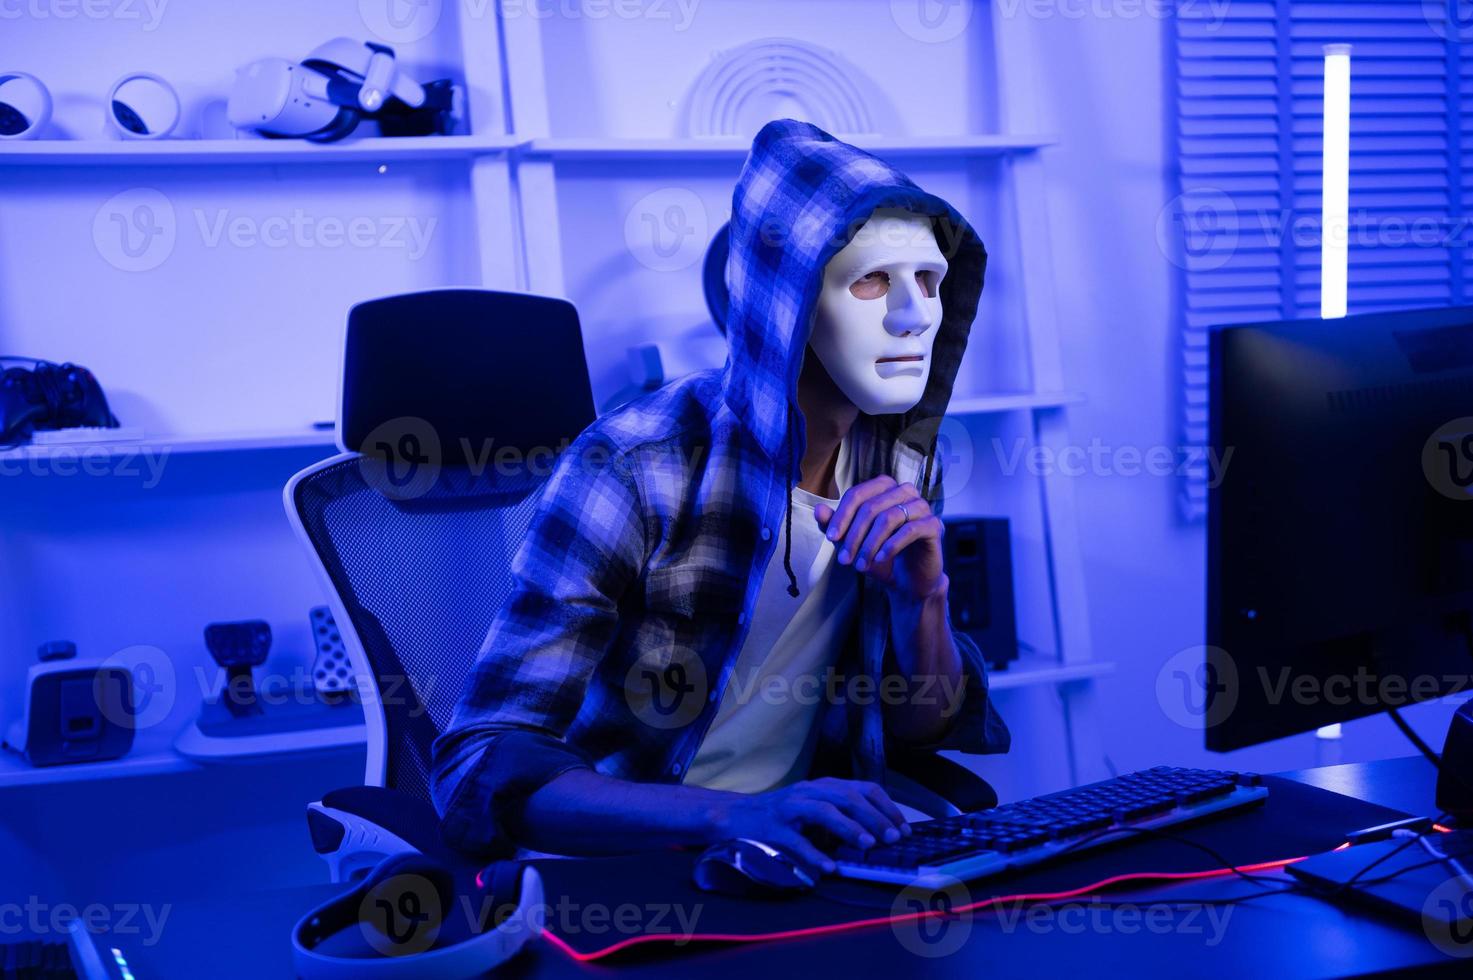 A Hacker is using laptop computer to steal data in the night photo